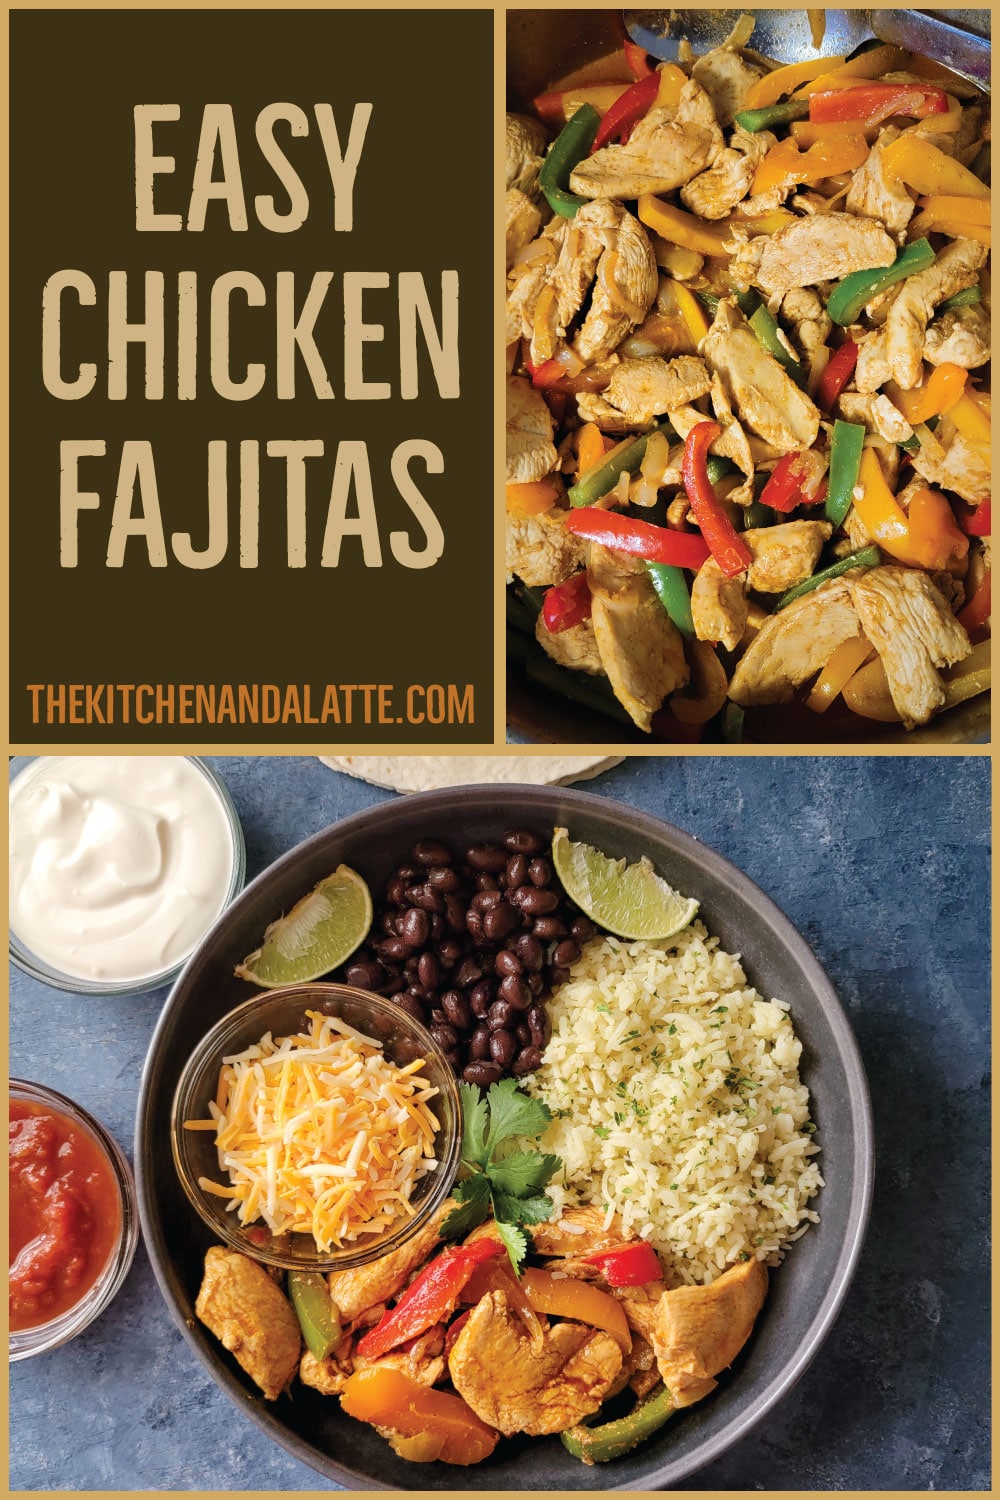 Easy chicken fajitas - Pinterest image. 2 pictures 1 is chicken fajita filling prepared in a pan and other is fajita filling with rice, beans and cheese in a dinner bowl.